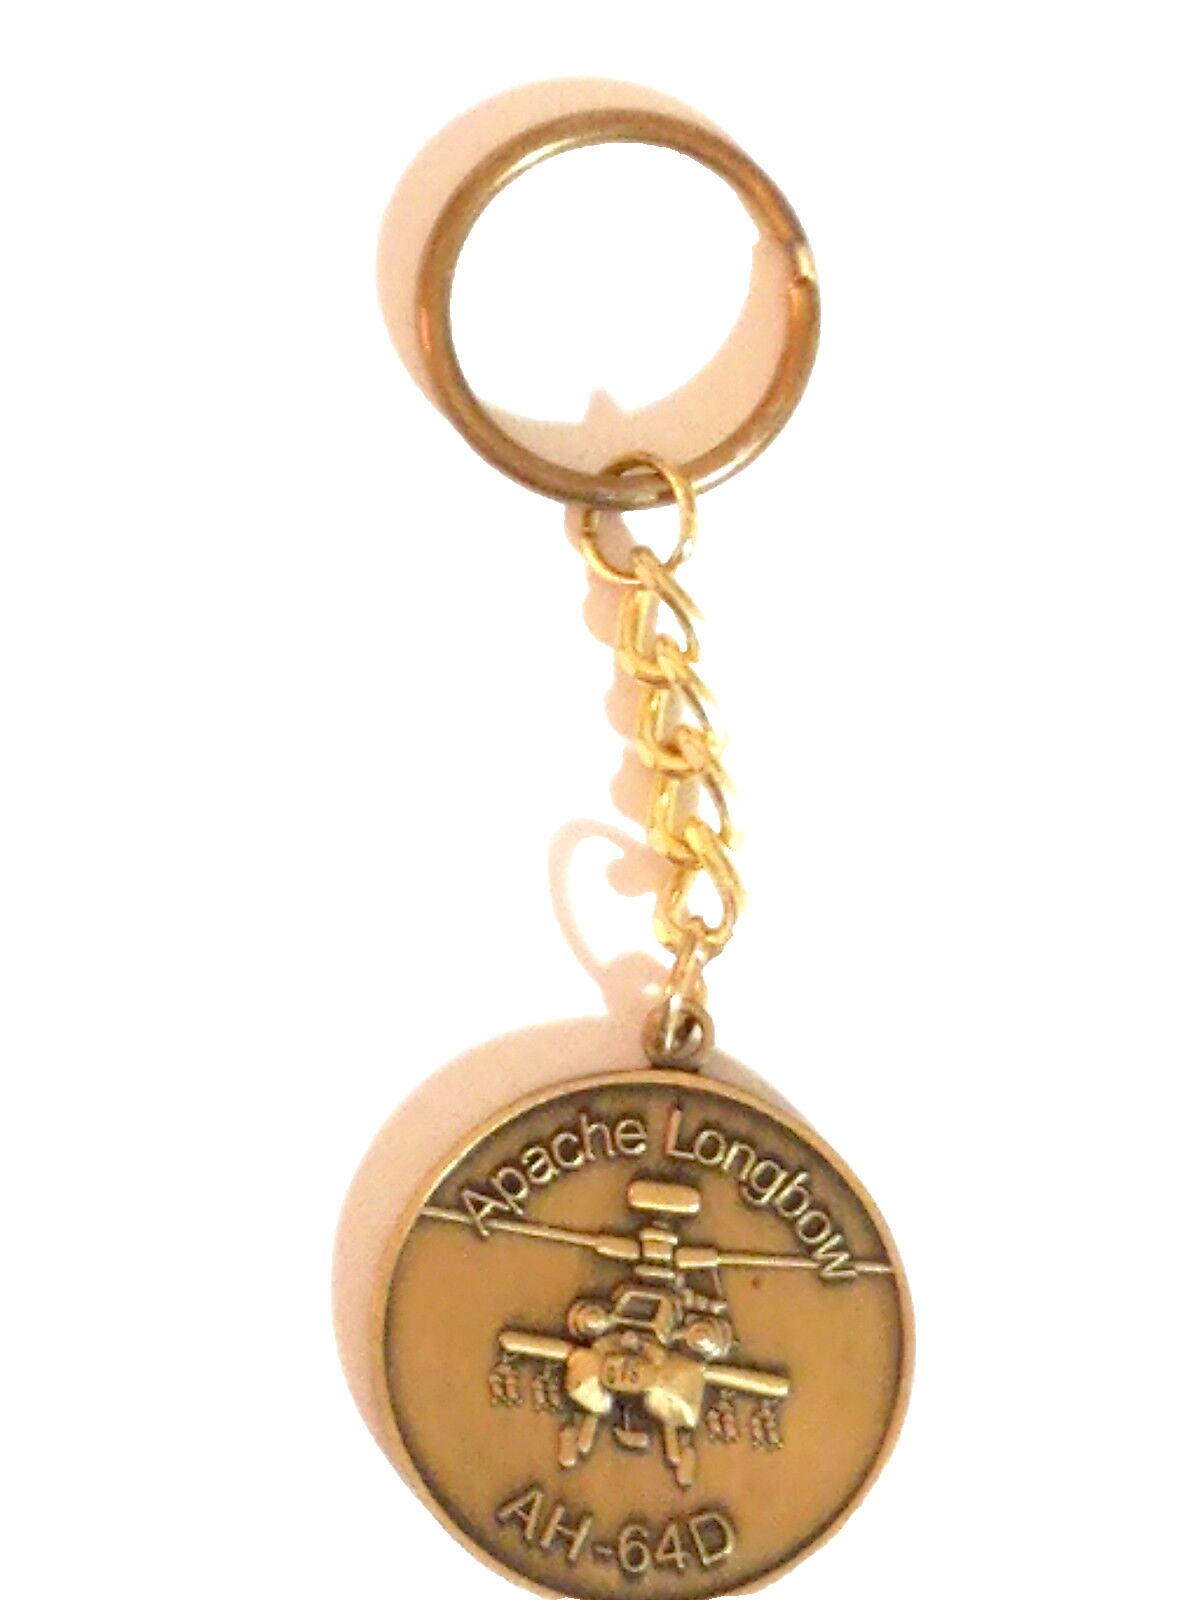 Apache Longbow AH-64D Helicopter Keychain Military